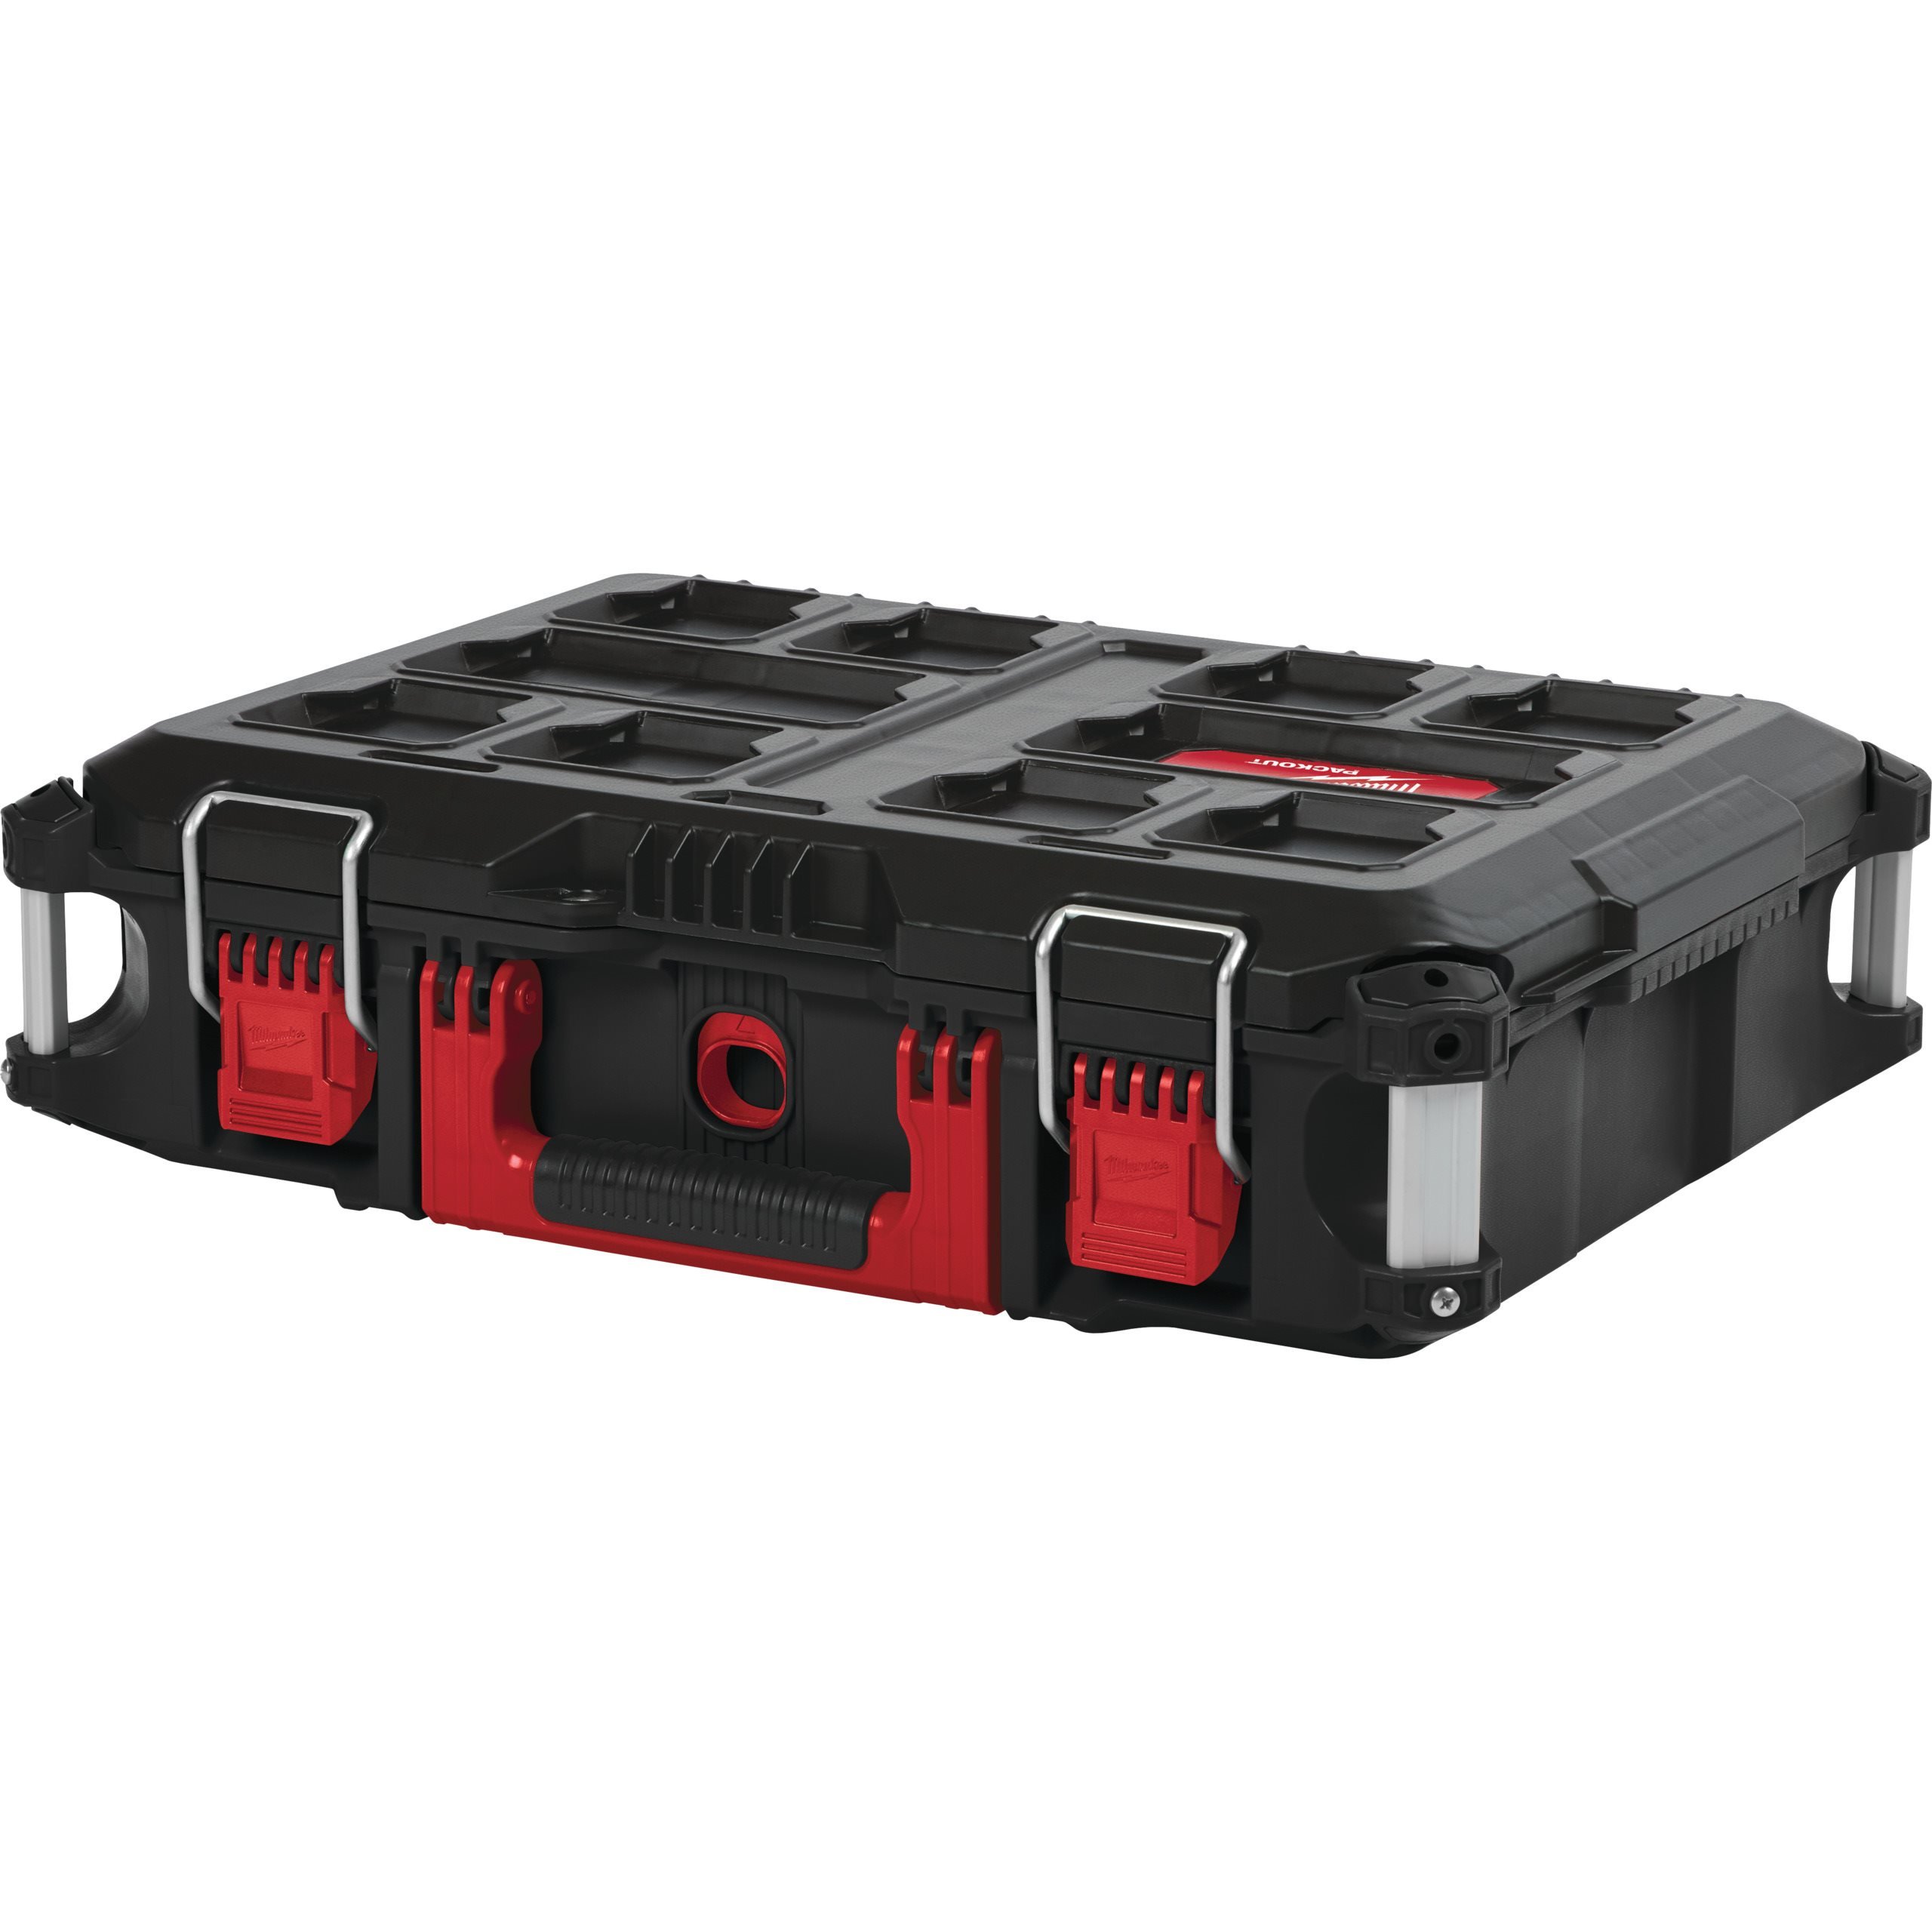 PACKOUT™ Case | Modular Storage Systems for Power Tools 